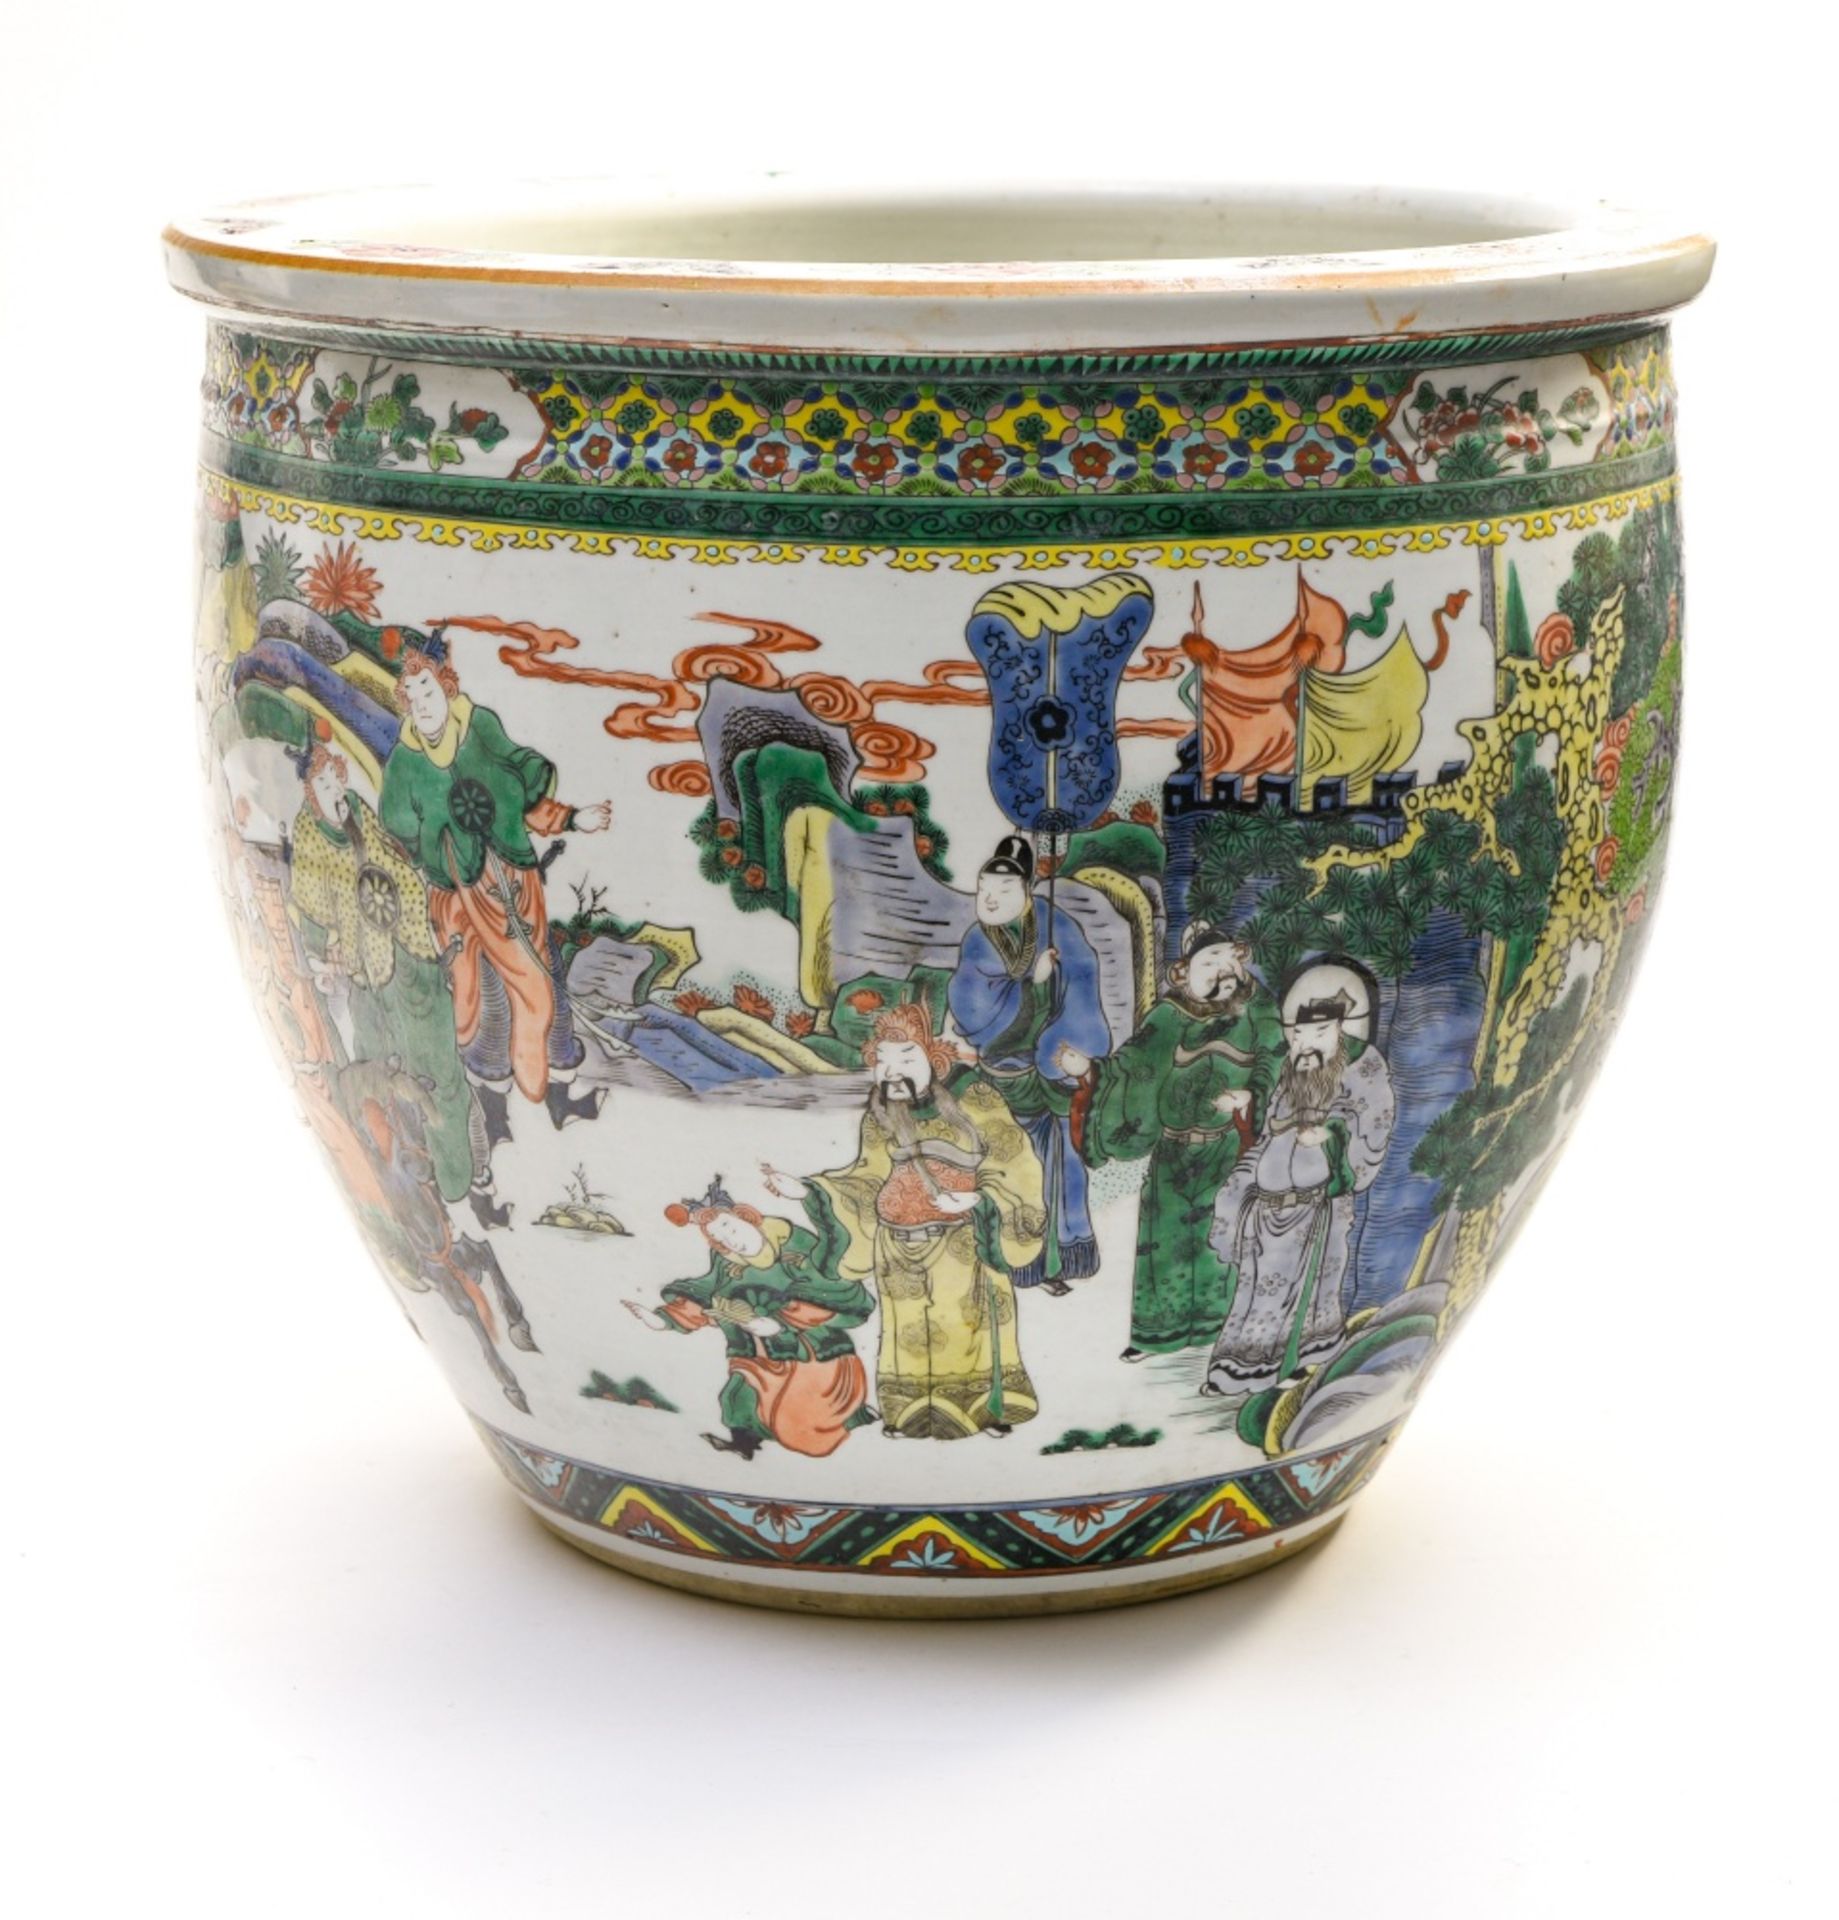 China, late 19th century, early 20th century Famille Verte planter or aquarium, Porcelain decorated - Image 5 of 7